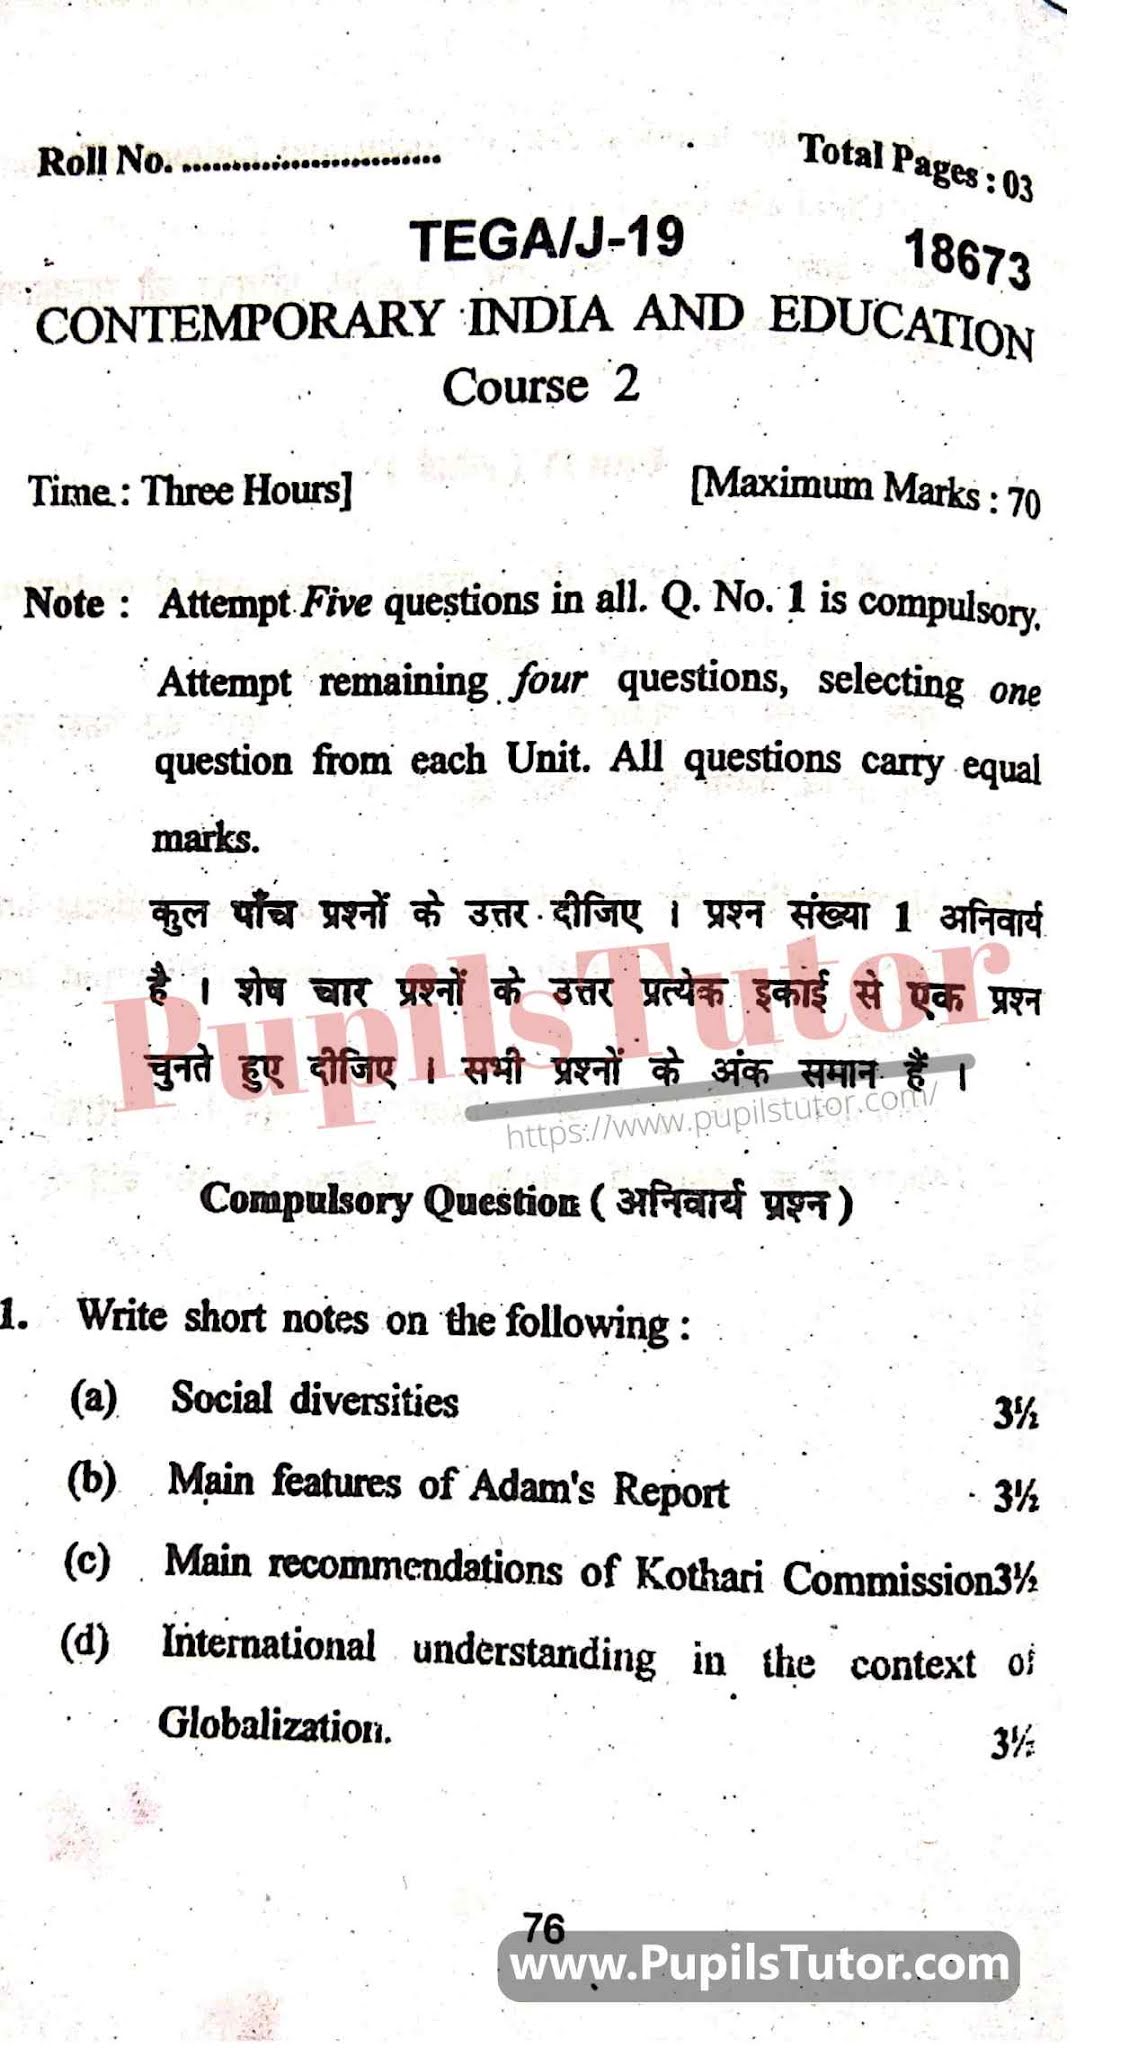 KUK (Kurukshetra University, Haryana) Contemporary India And Education Question Paper 2019 For B.Ed 1st And 2nd Year And All The 4 Semesters In English And Hindi Medium Free Download PDF - Page 1 - Pupils Tutor